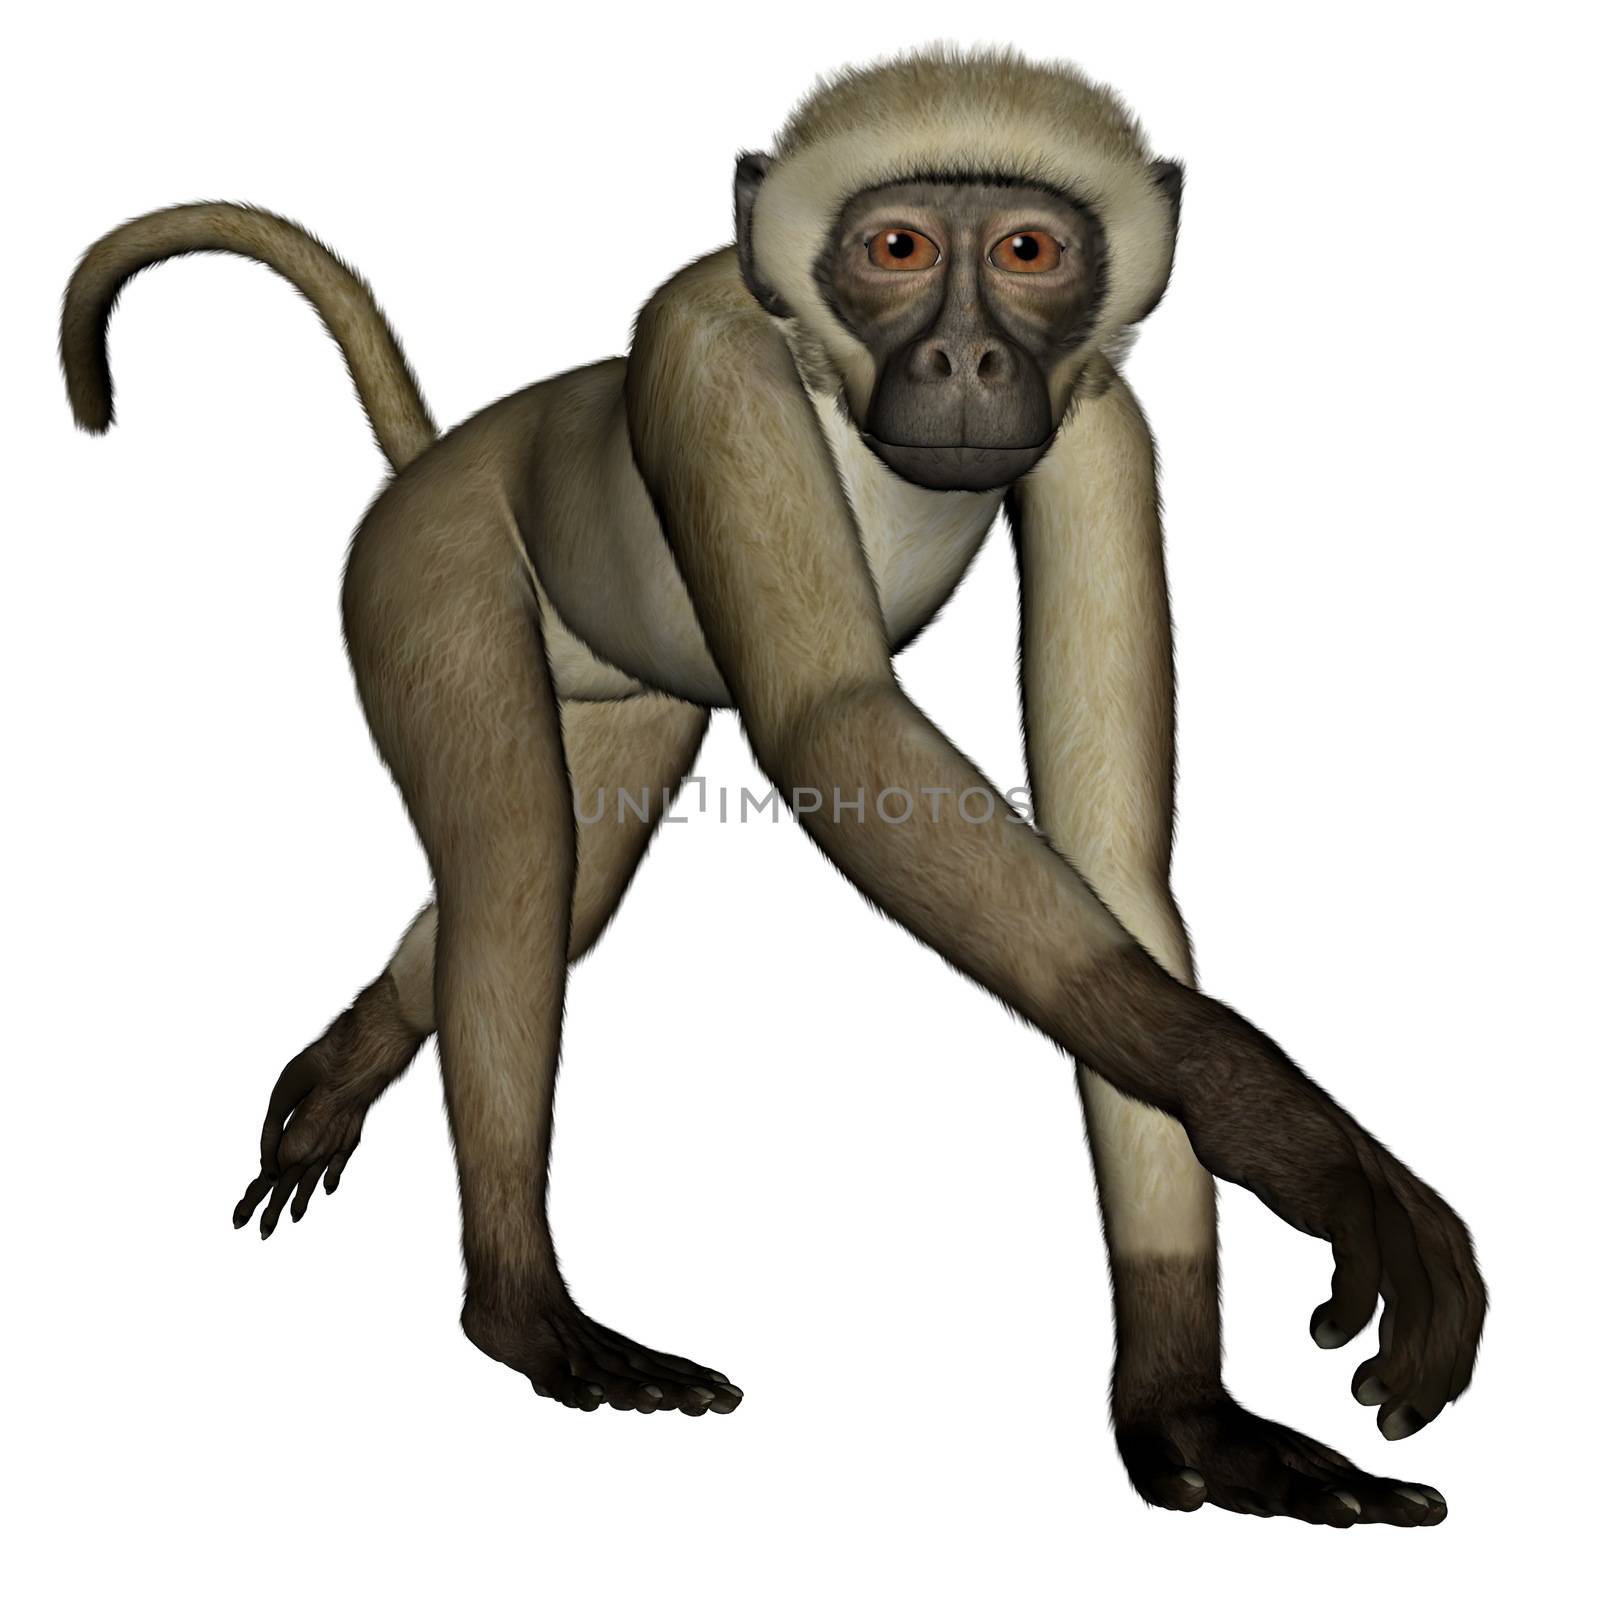 Monkey walking isolated in white background- 3D render